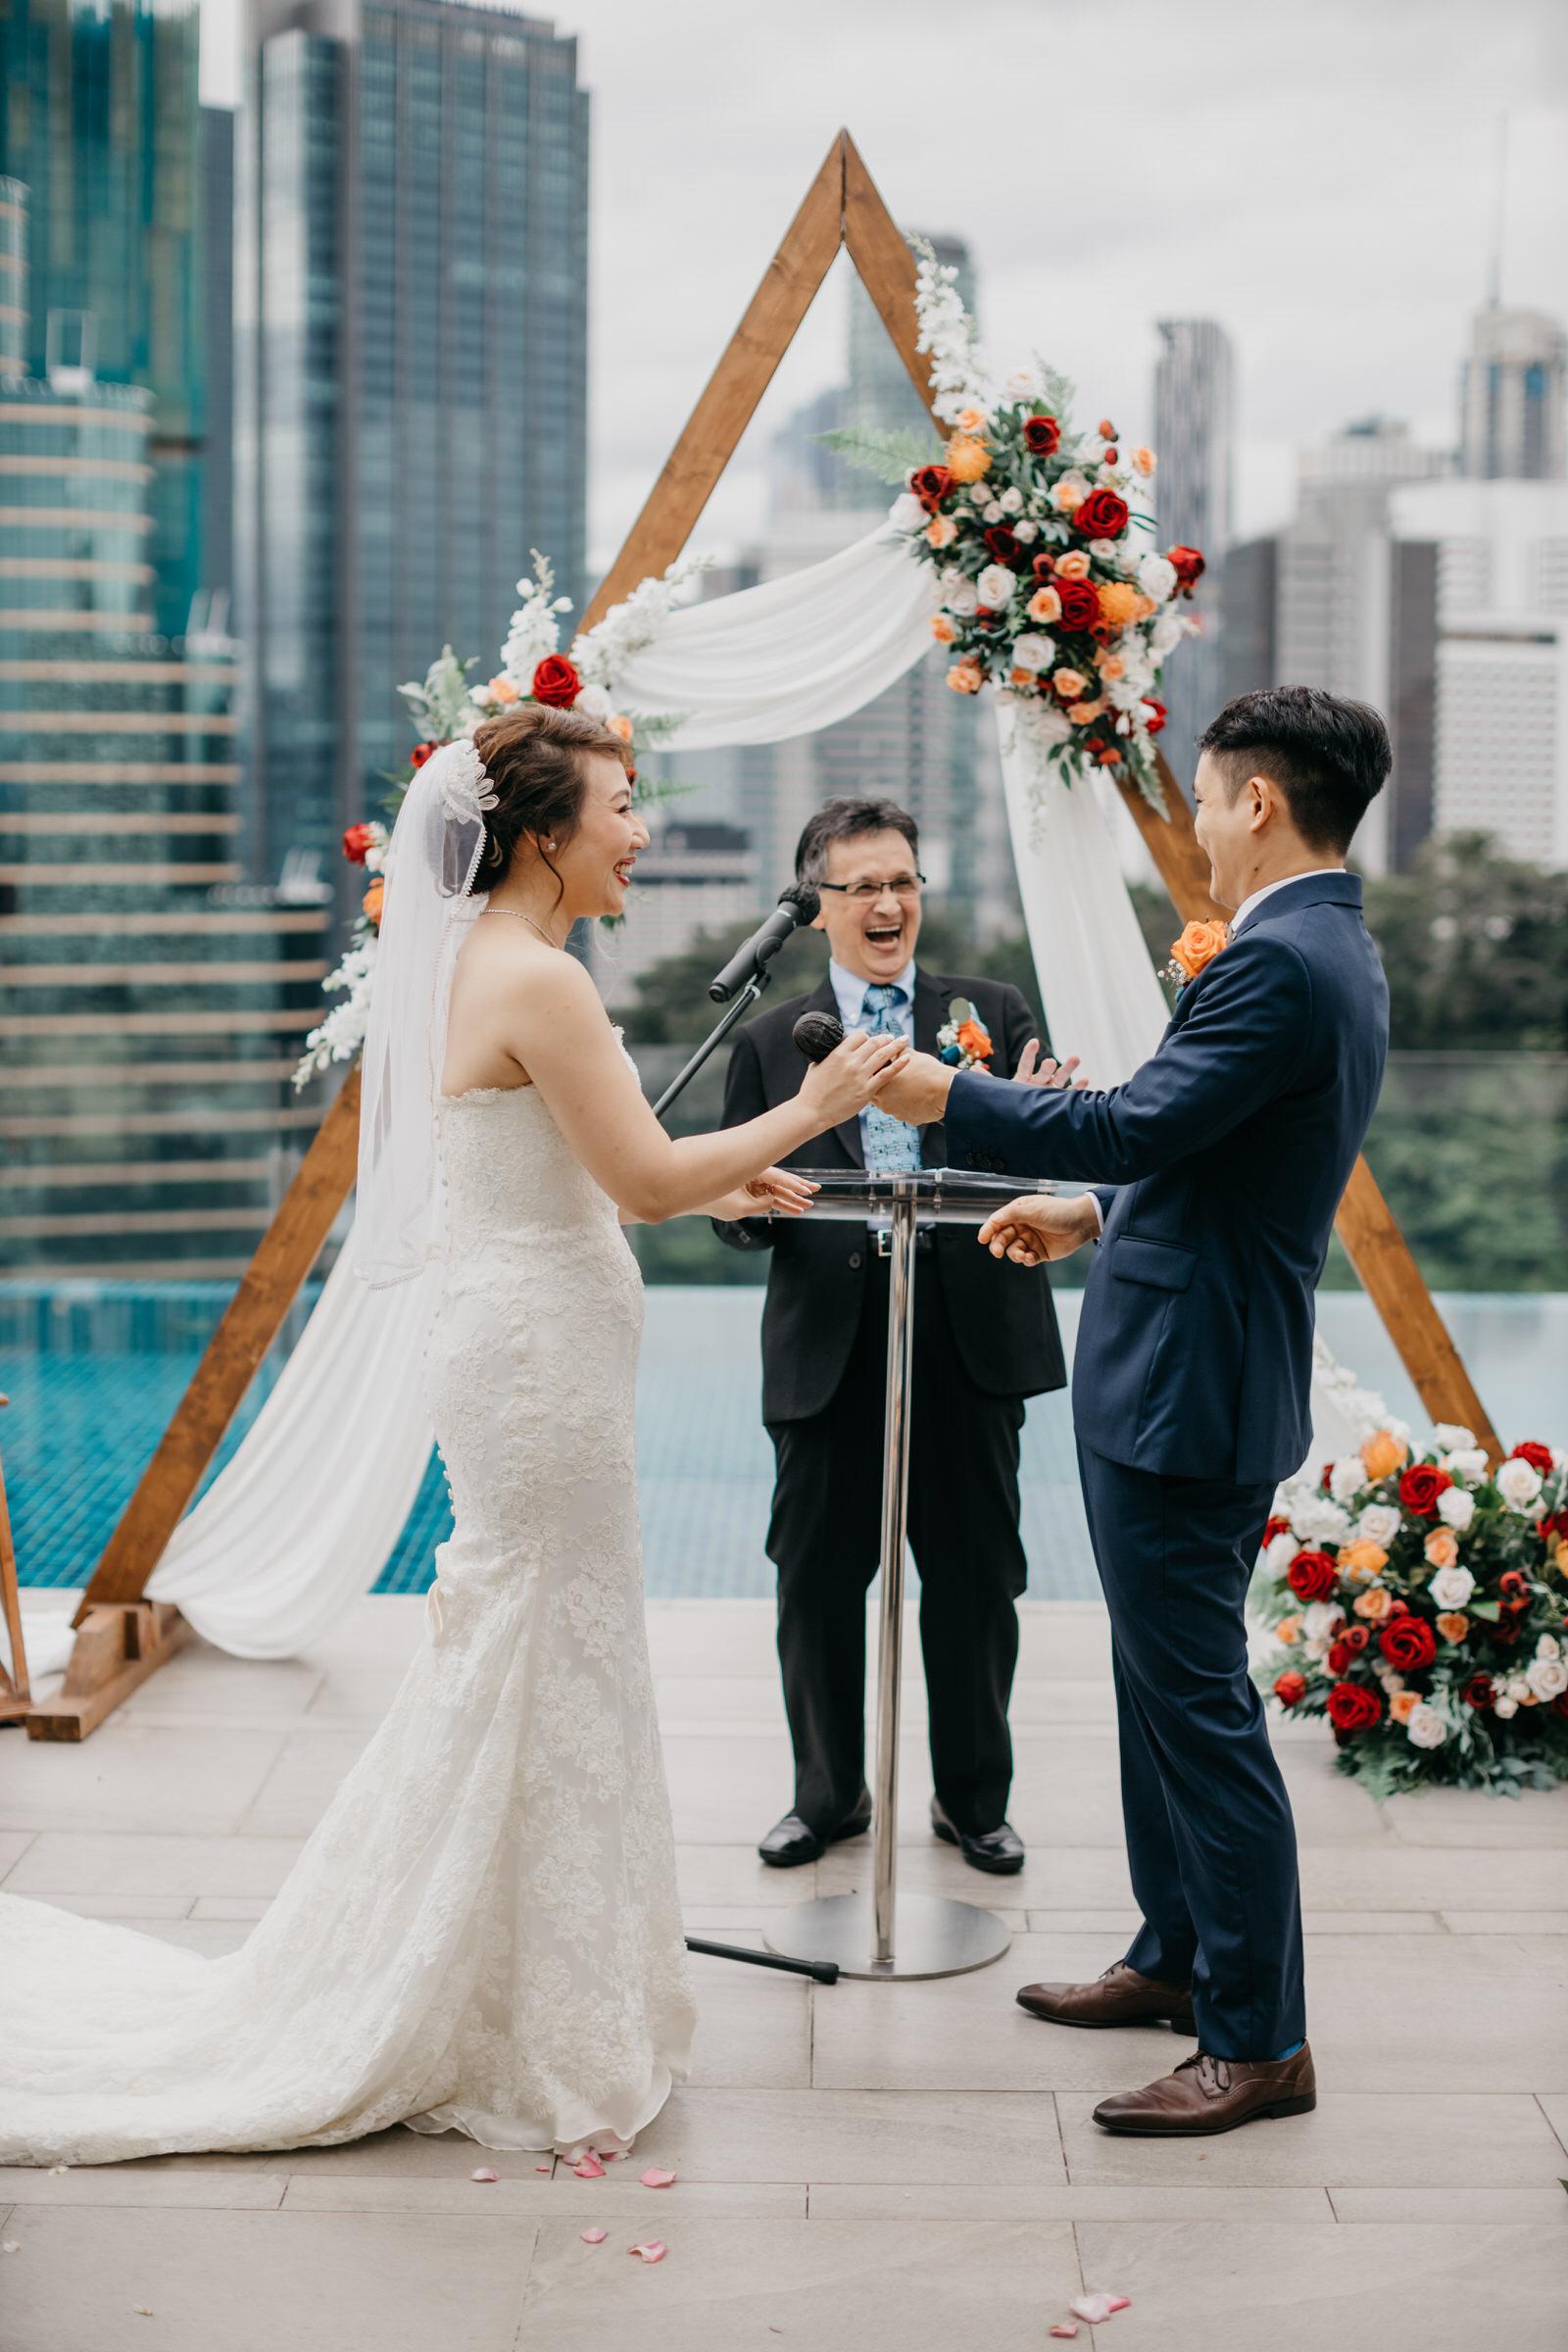 Vow Exchange Boho Deco Rooftop Poolside Wedding at Hotel Stripes Kuala Lumpur MCO2.0 Cliff Choong Photography Malaysia Covid19 ROM 